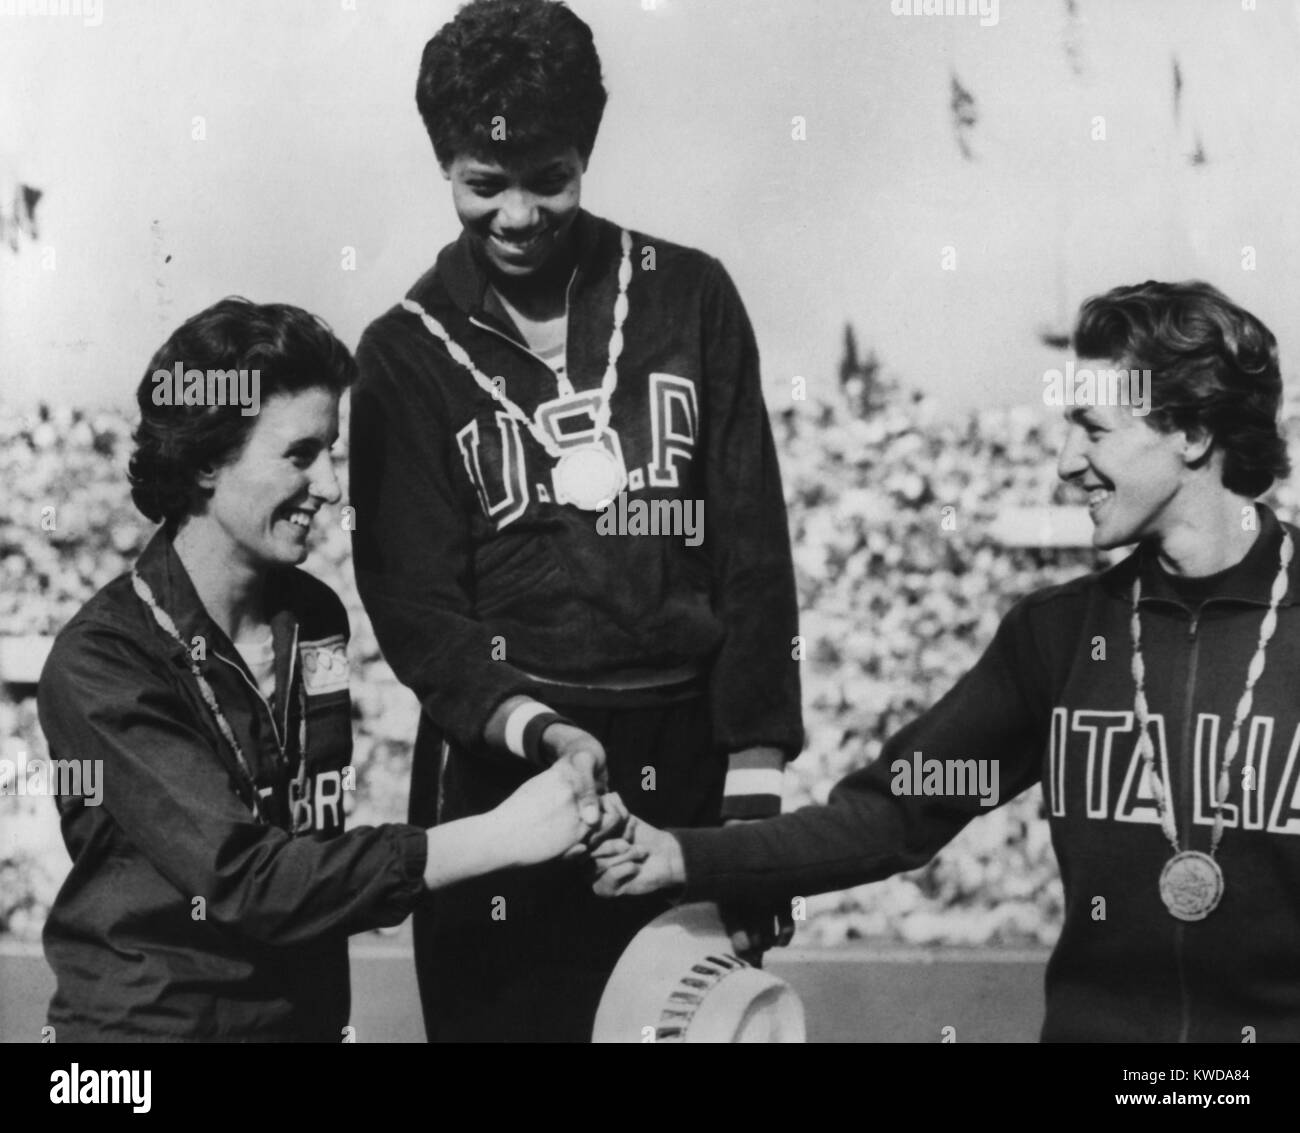 1960 Olympic winners of the women's 100 meter race on victory podium. First is Wilma Rudolph of USA. Dorothy Hyman of Great Britain is second, and Guiseppina Leone of Italy is third (BSLOC 2016 7 38) Stock Photo